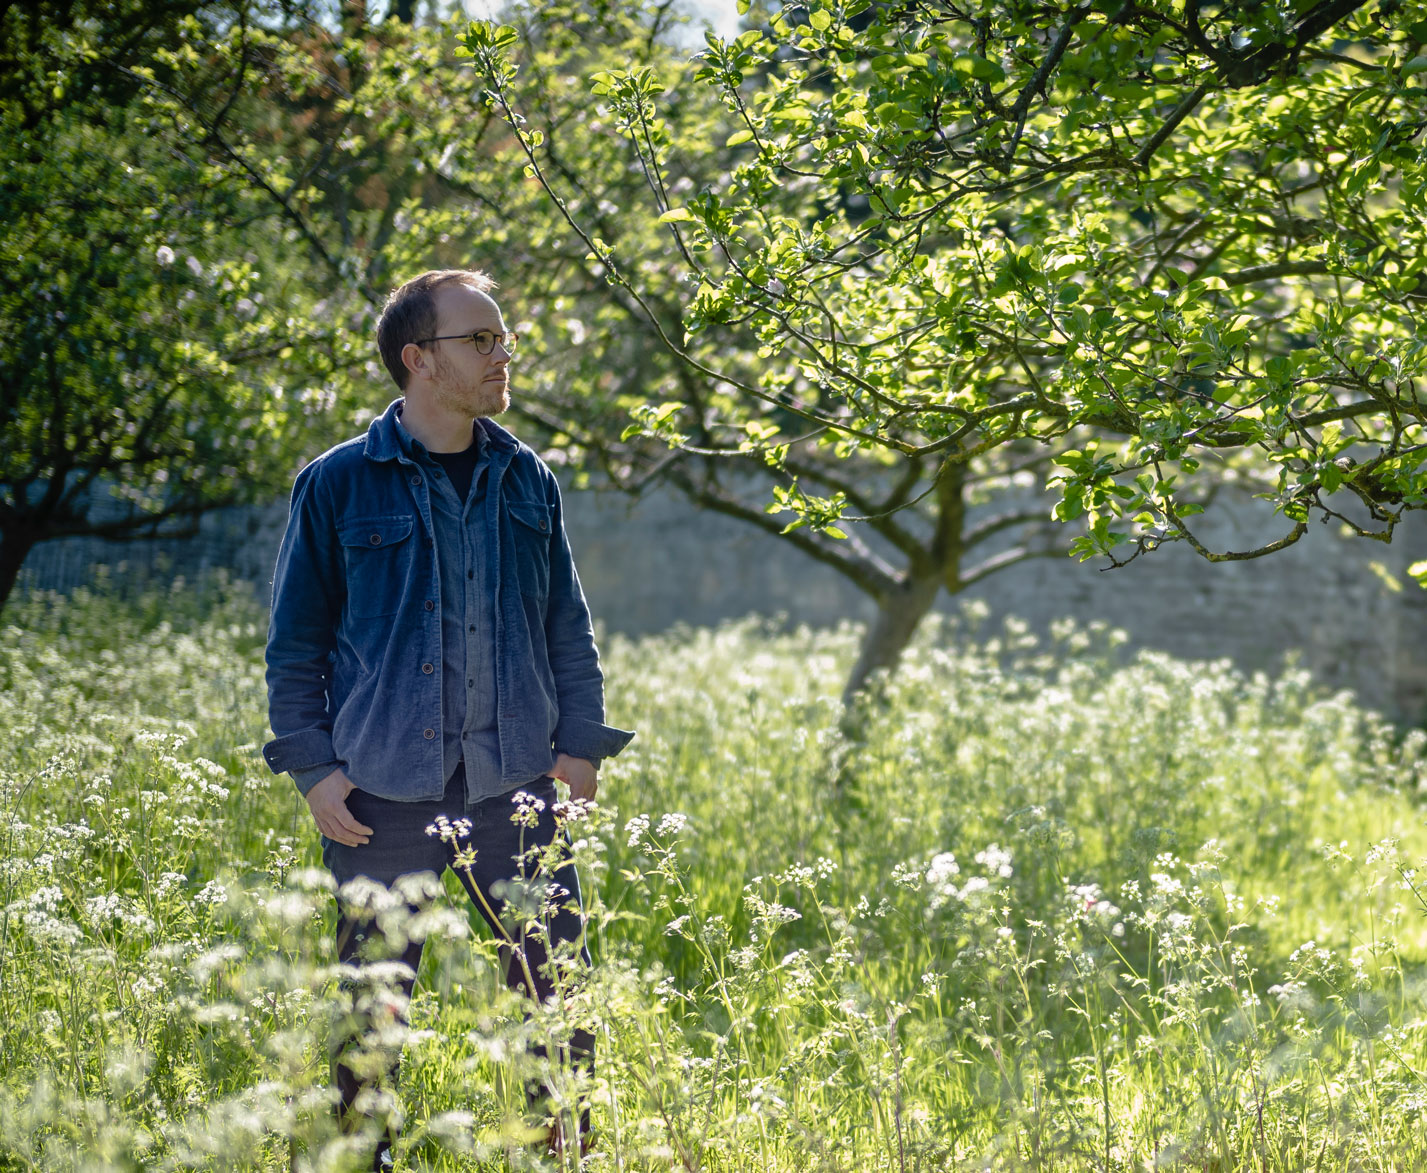 Portrait of Colm Joseph Gardens founder and lead designer, Colm Joseph standing in an orchard and wildflower meadow 